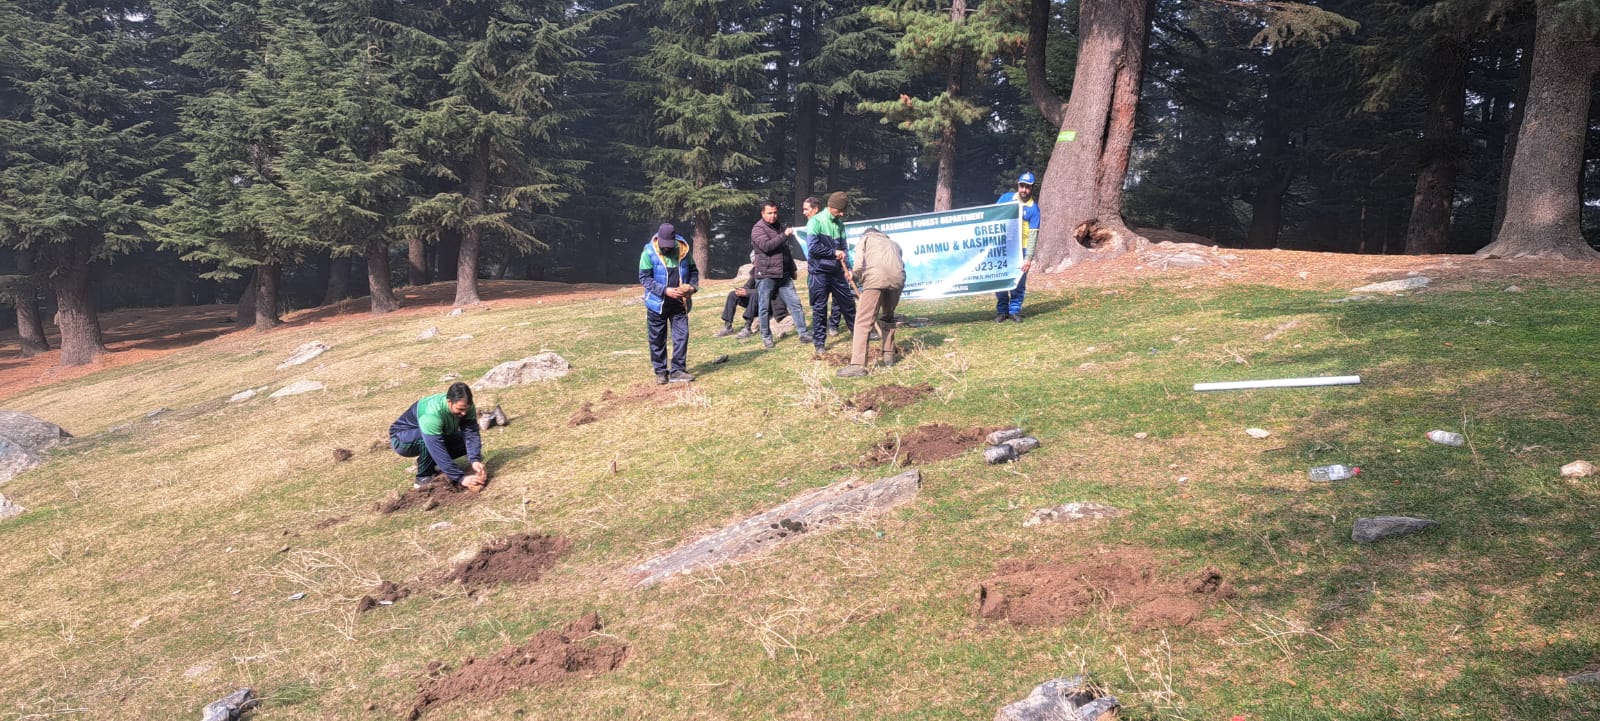 Cleanliness Drive at Srunez Waterfall in Kalantra Forest Block